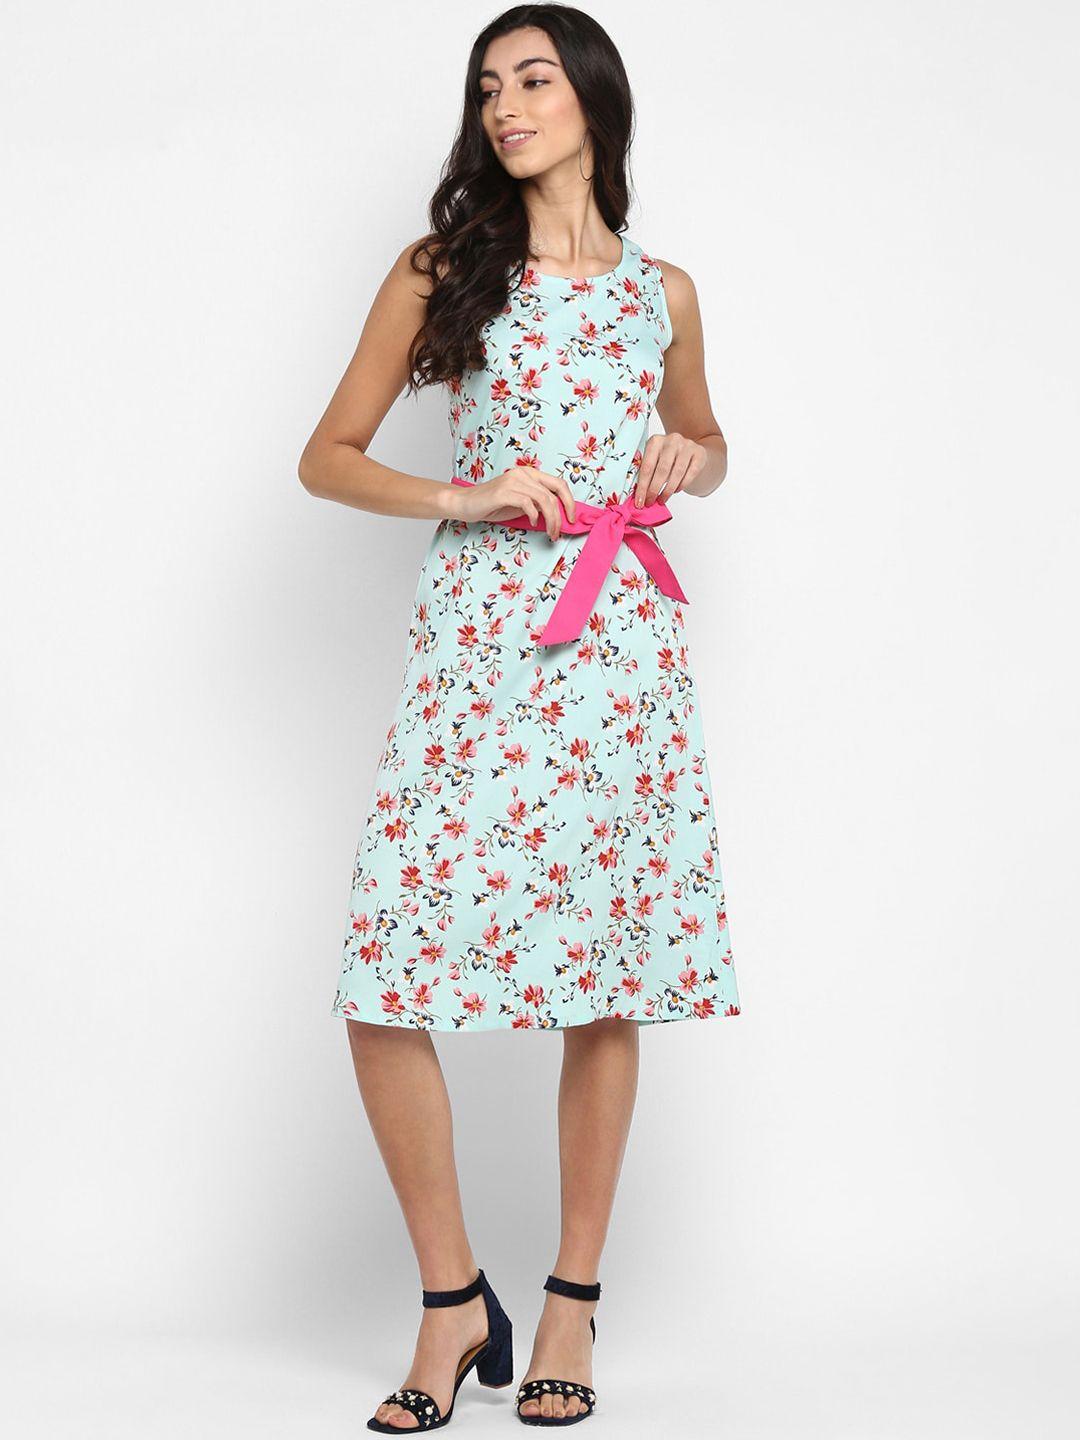 deebaco turquoise blue & pink floral a-line dress